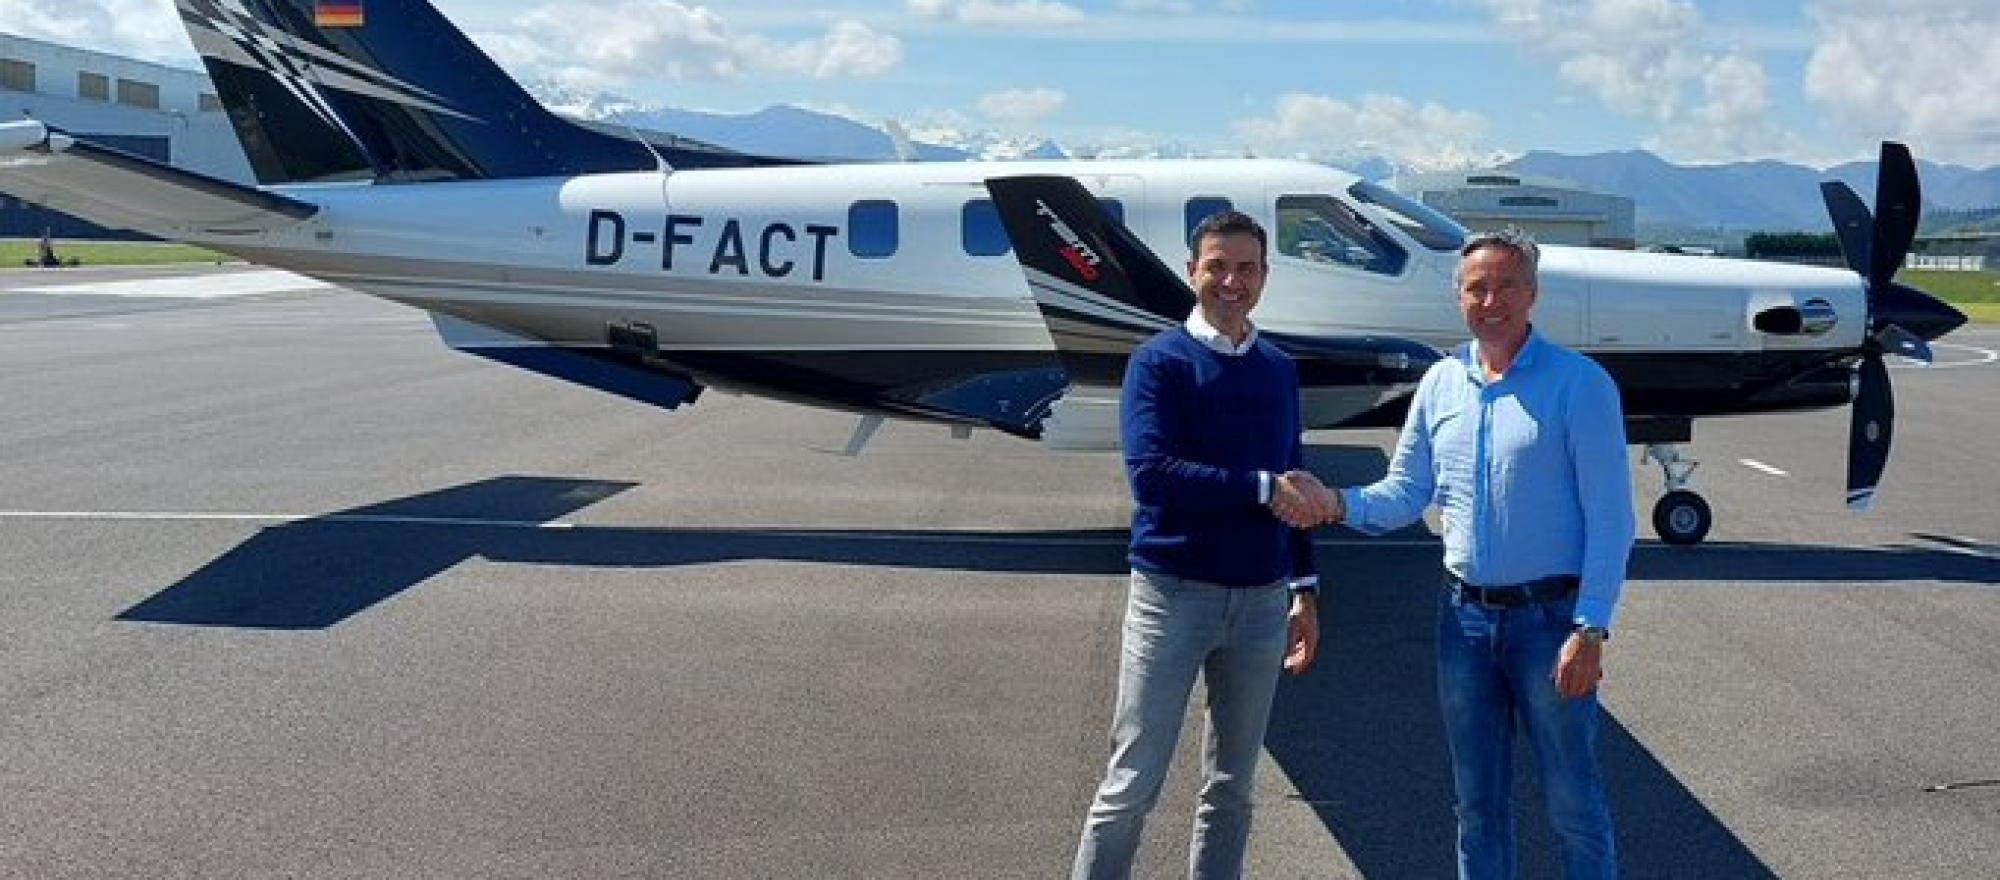 First TBM 960 delivery